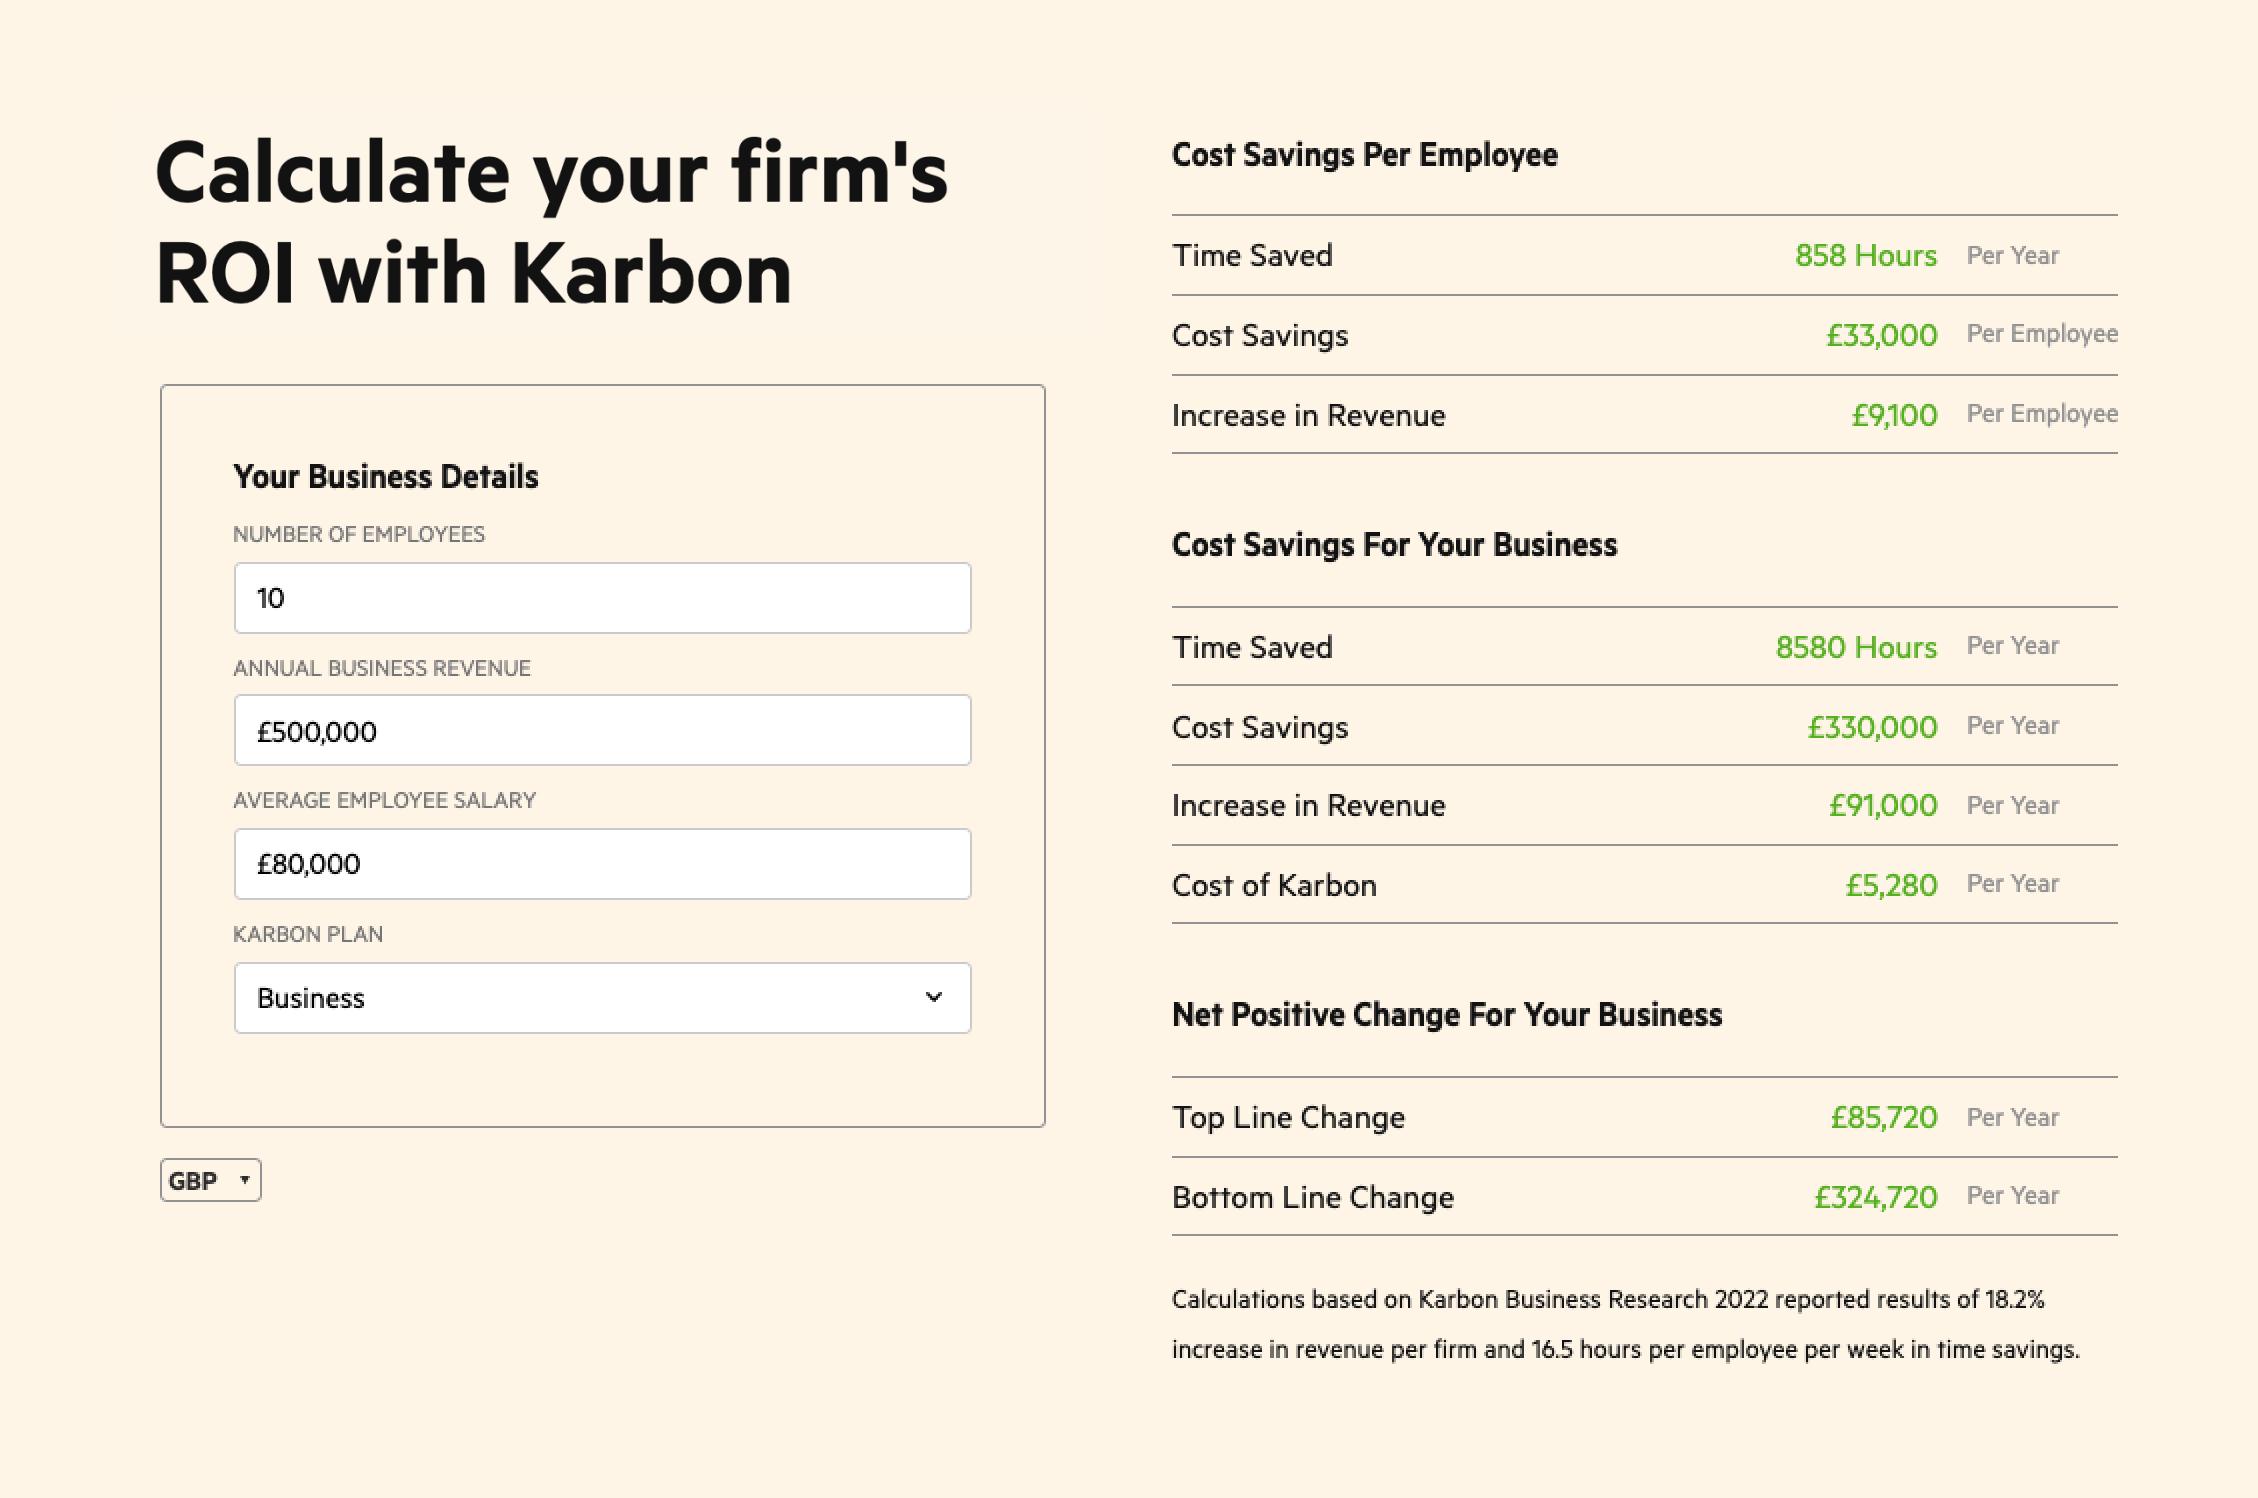 Karbon's ROI calculator explaining that for a firm with 10 employees using Karbon, they would save: 858 hours per year per employee, £33,000 per employee, and increase revenue by £91,000 per year.